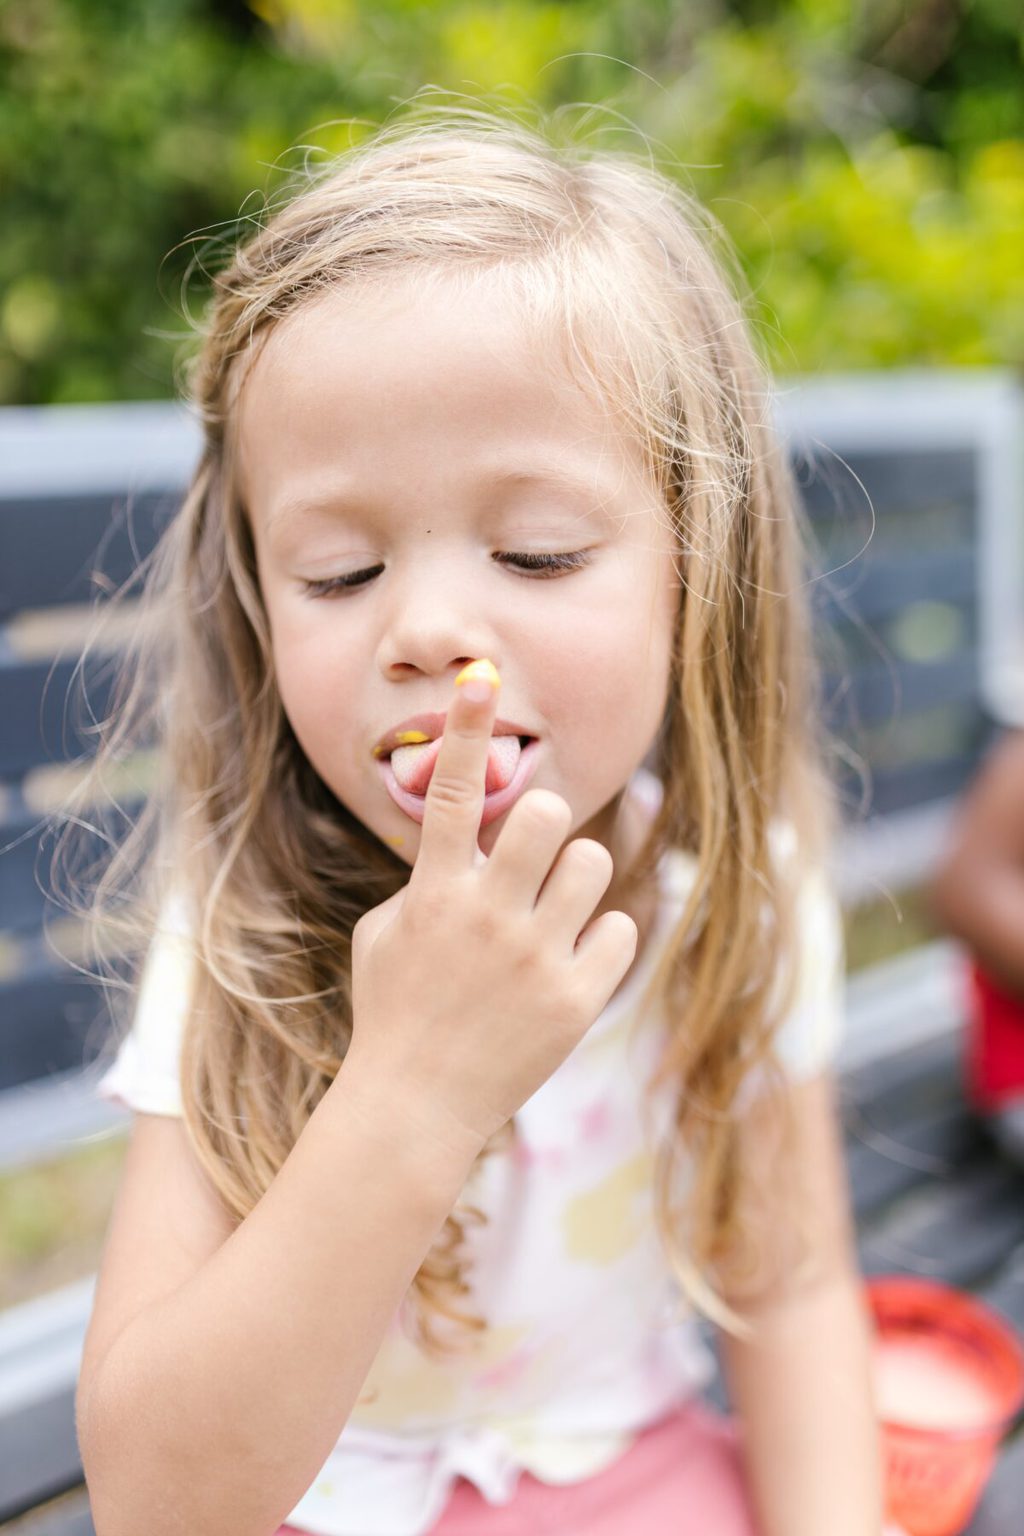 Social Etiquette: Why Teaching Children Manners Early Is Important